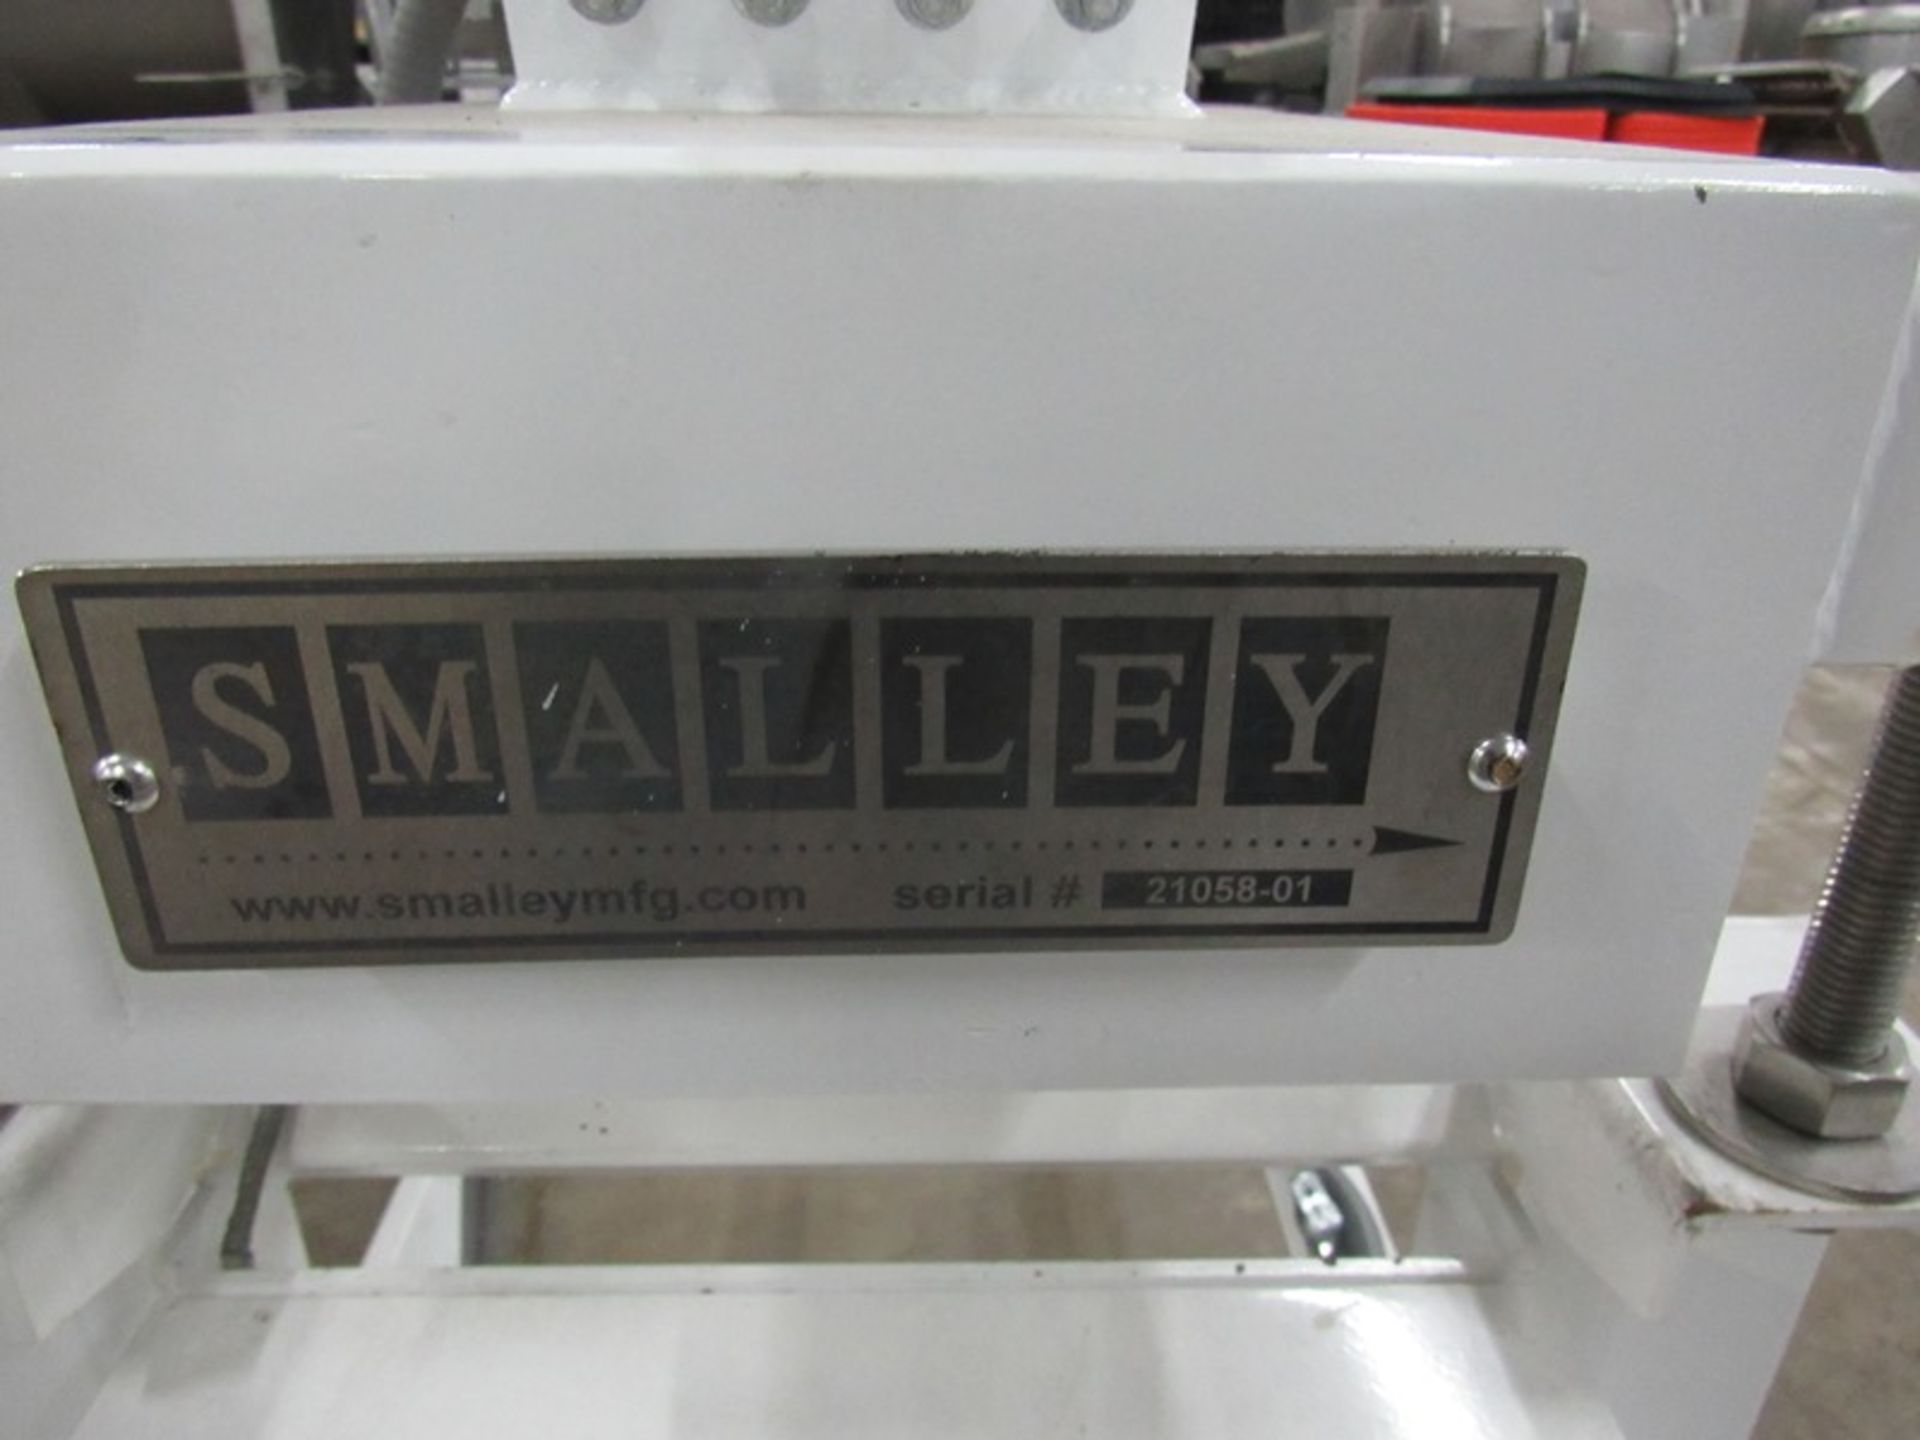 Smalley Mdl. EMC2t Vibratory Conveyor, dimpled stainless steel tray, 9" W X 106" L X 4" D, 4 1/2" - Image 9 of 9